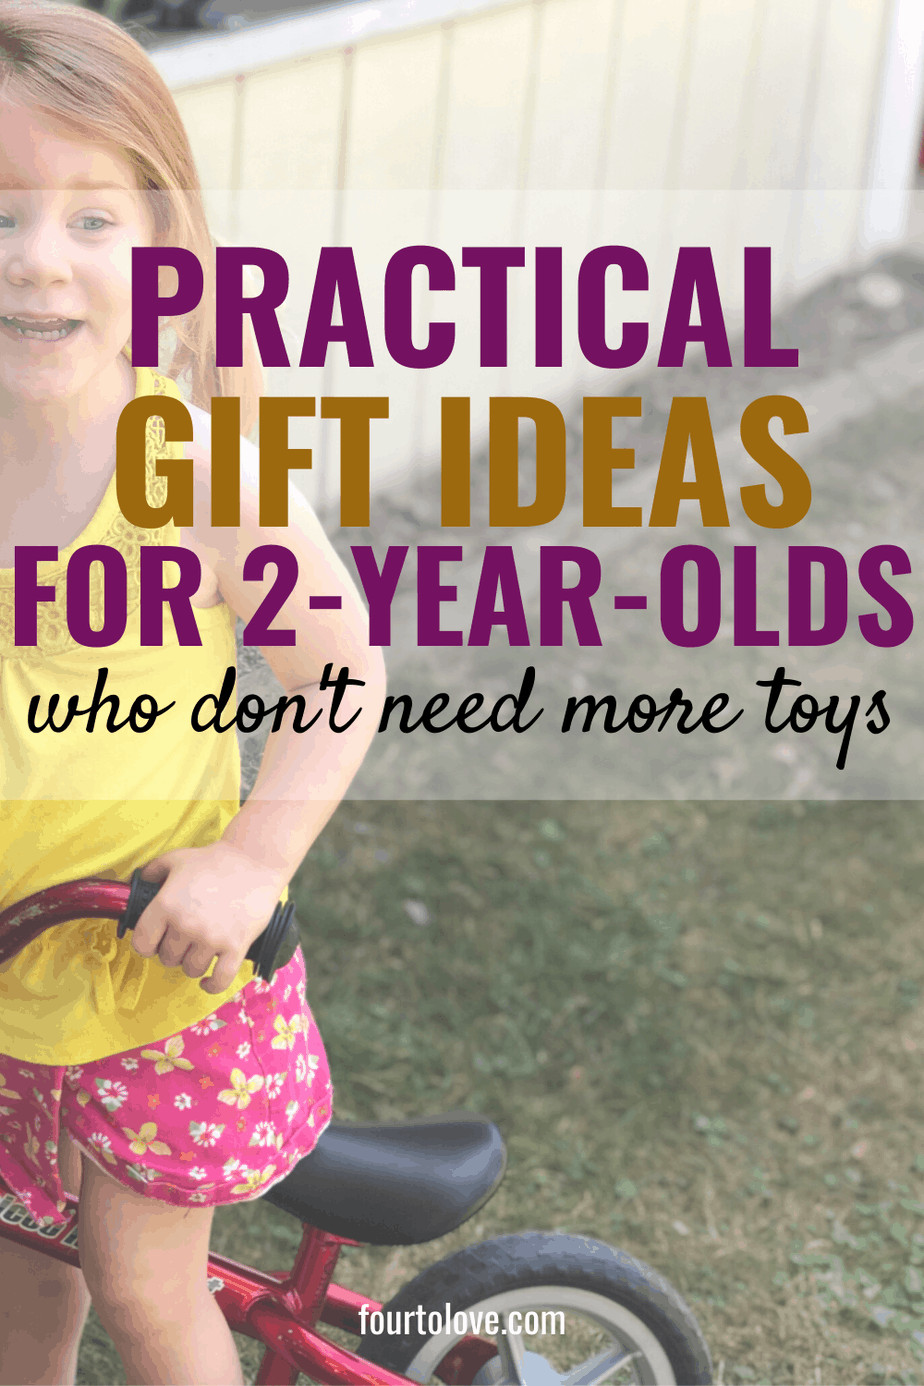 Gift Ideas For 2 Year Old Girls
 30 Practical Gifts for Two Year Olds that Parents will